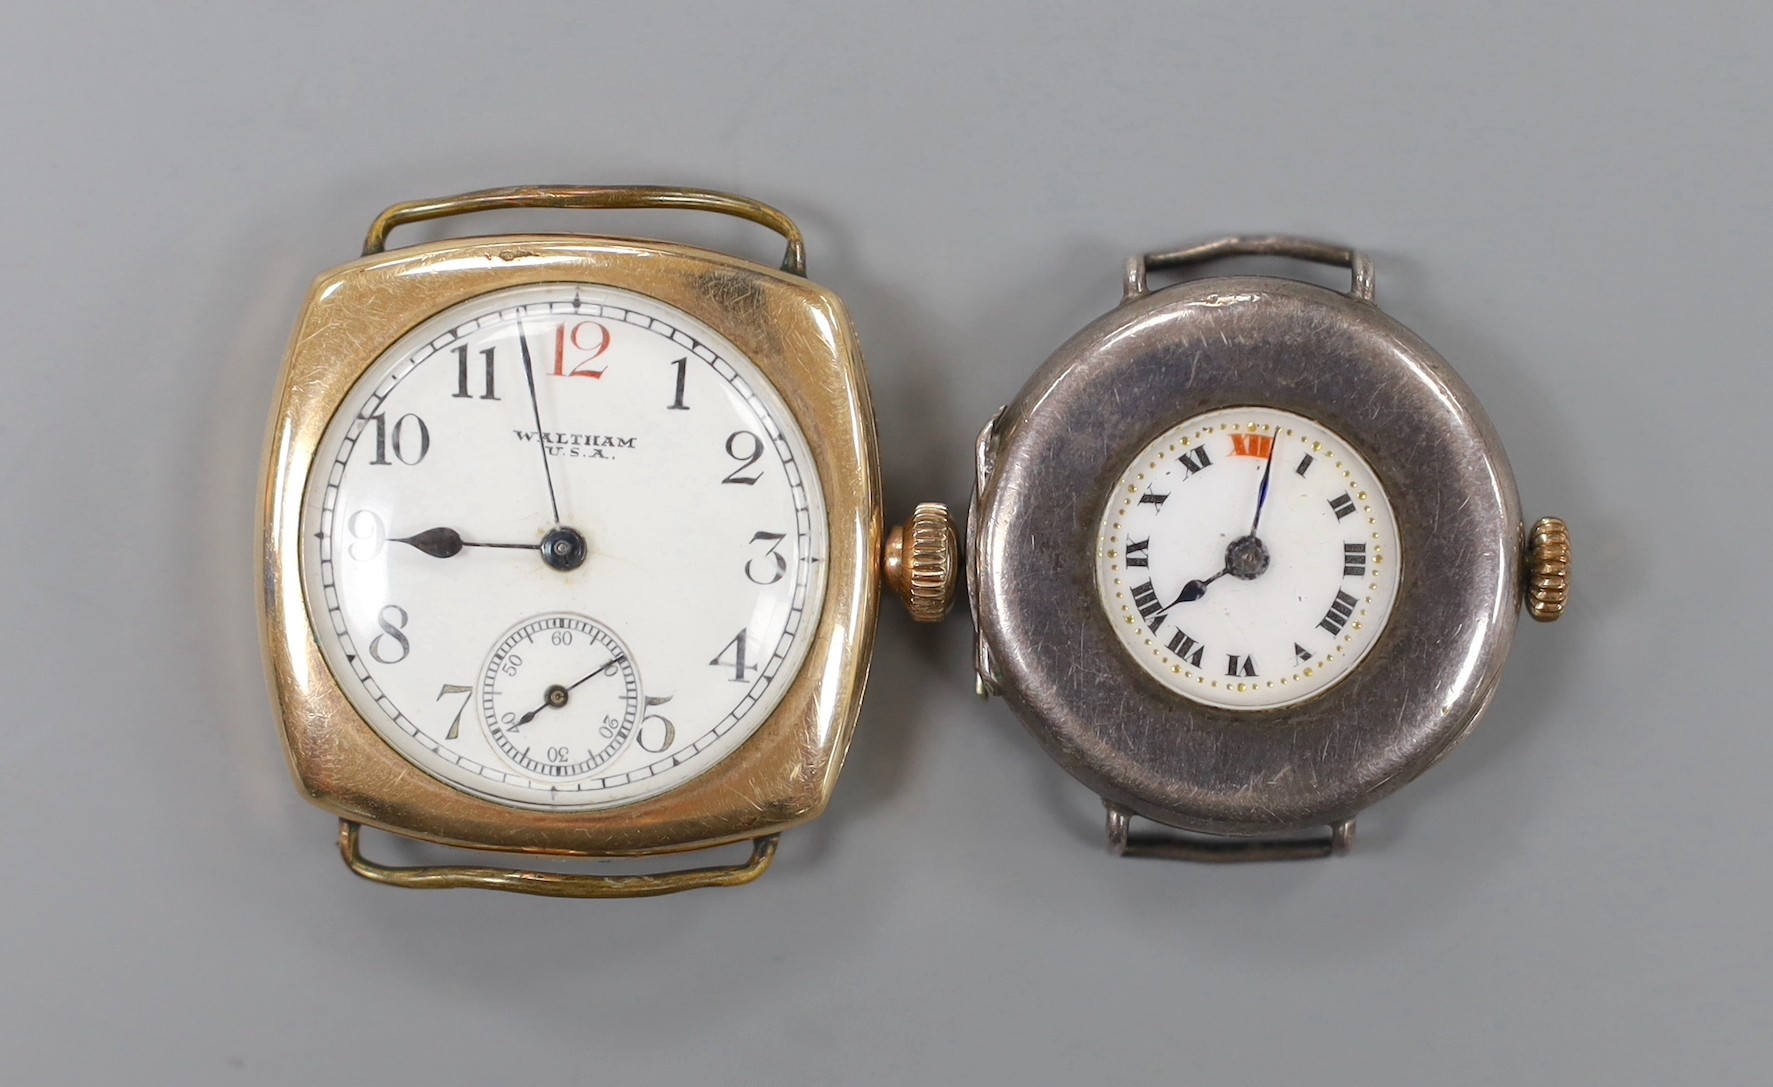 A gentleman's gold plated Waltham manual wind wrist watch and a silver manual wind wrist watch, both without straps.